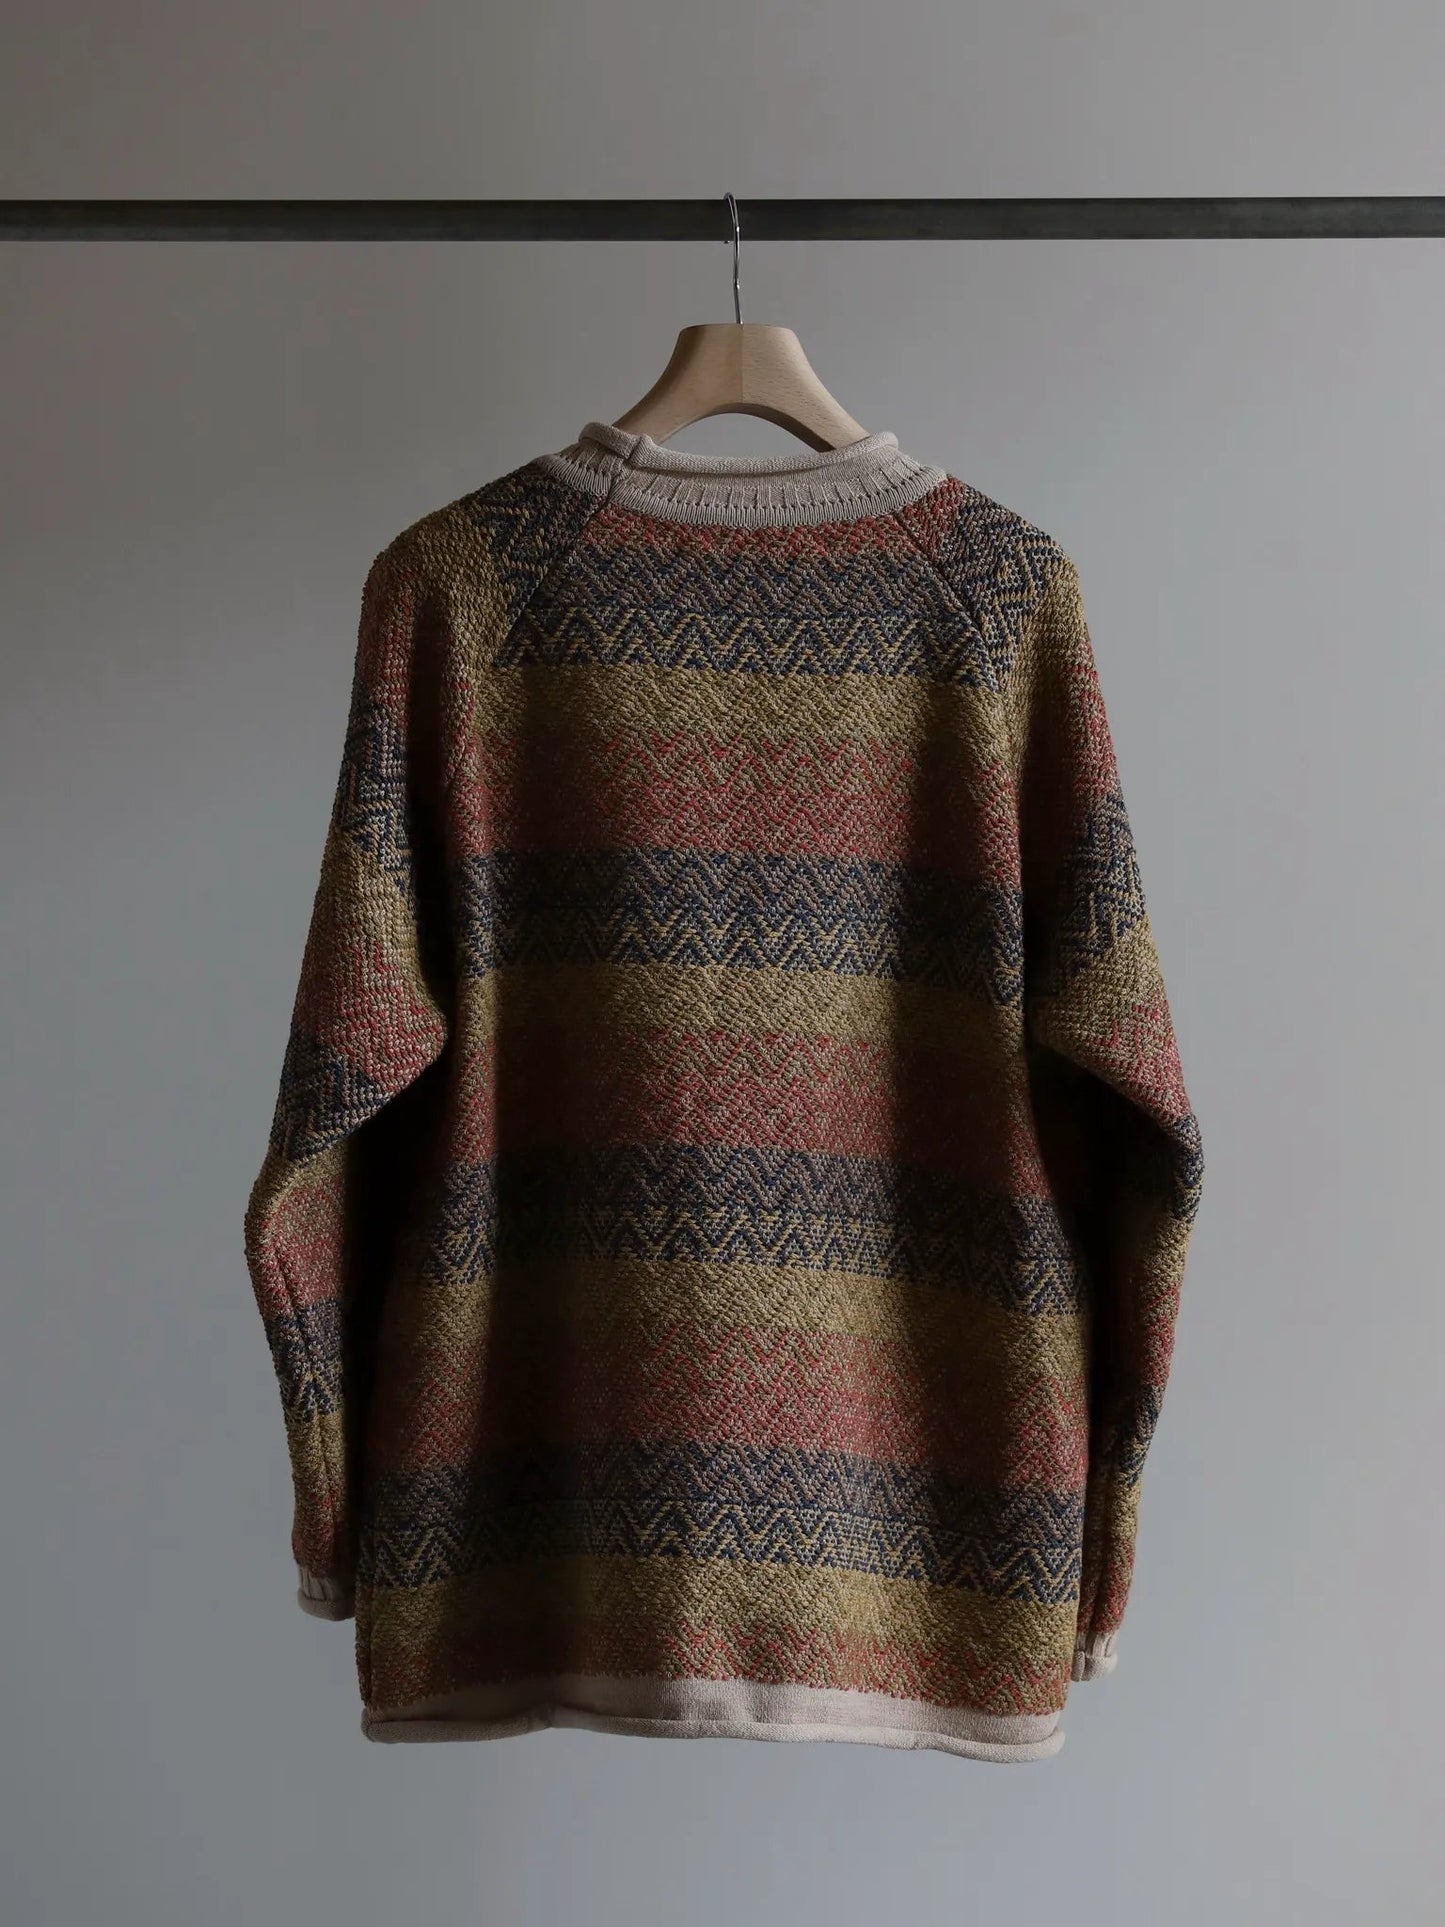 niceness-sharley-sry-pullover-knit-mix-2